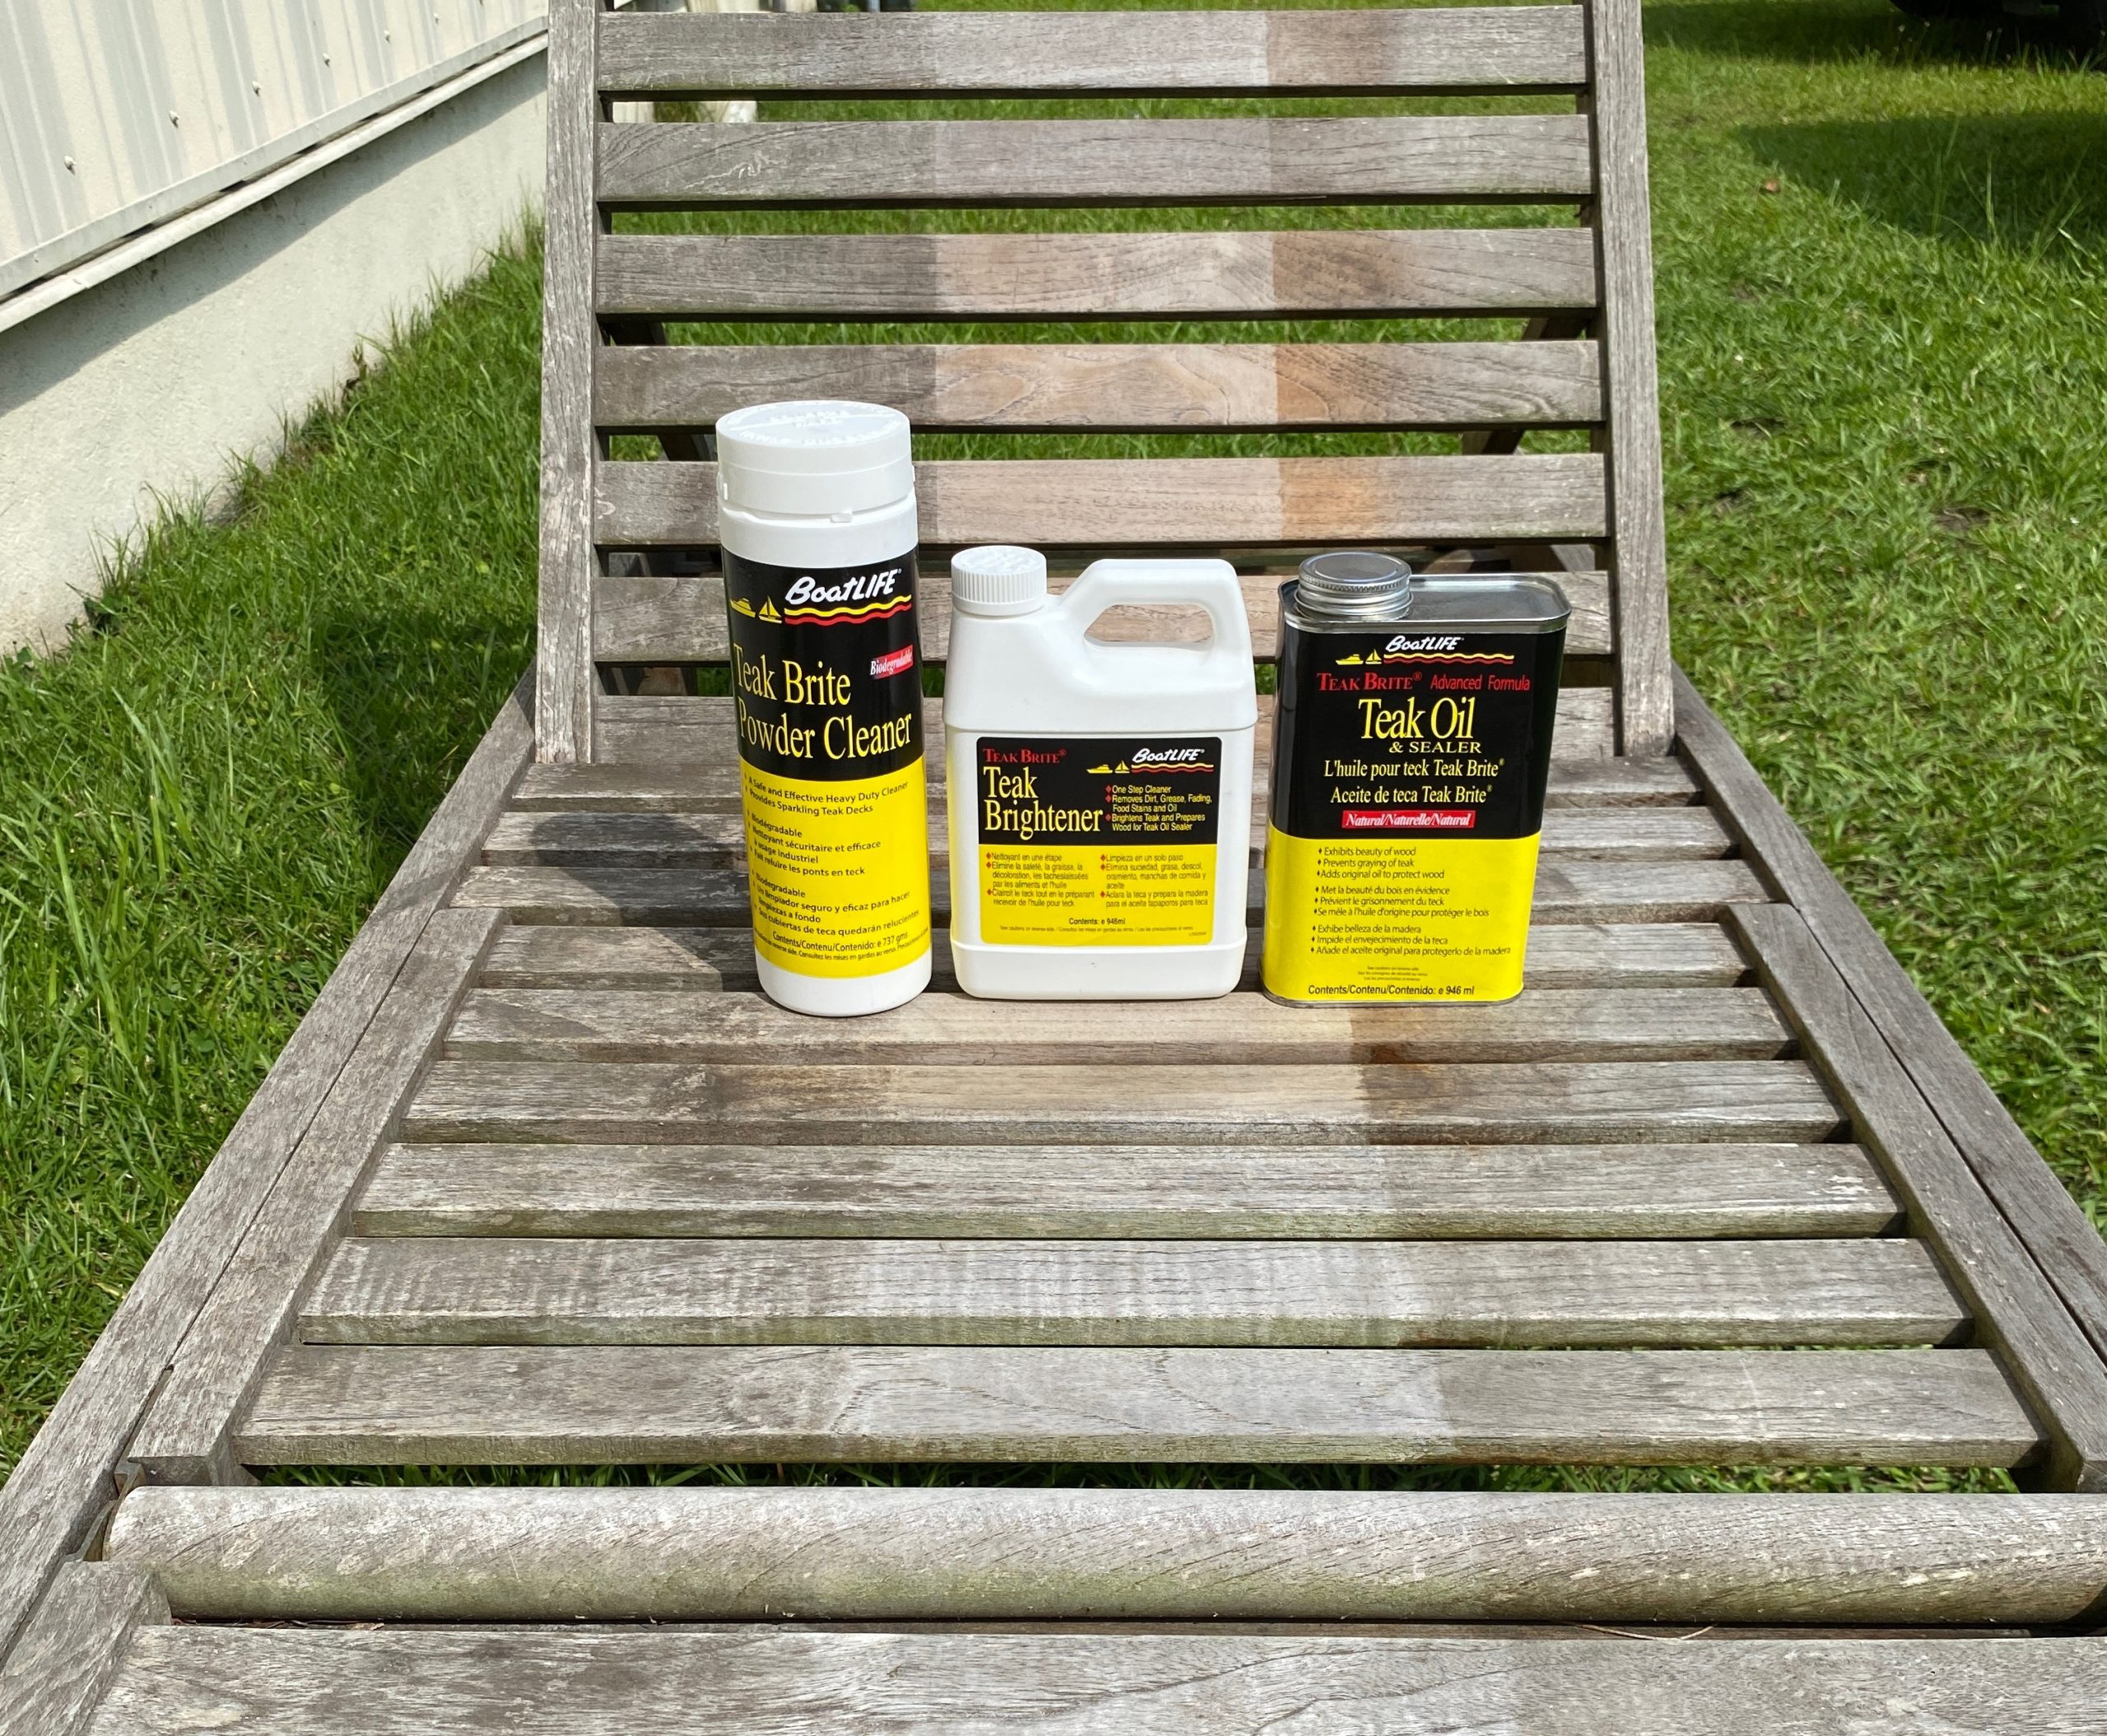 Teak Care how-to video and products used